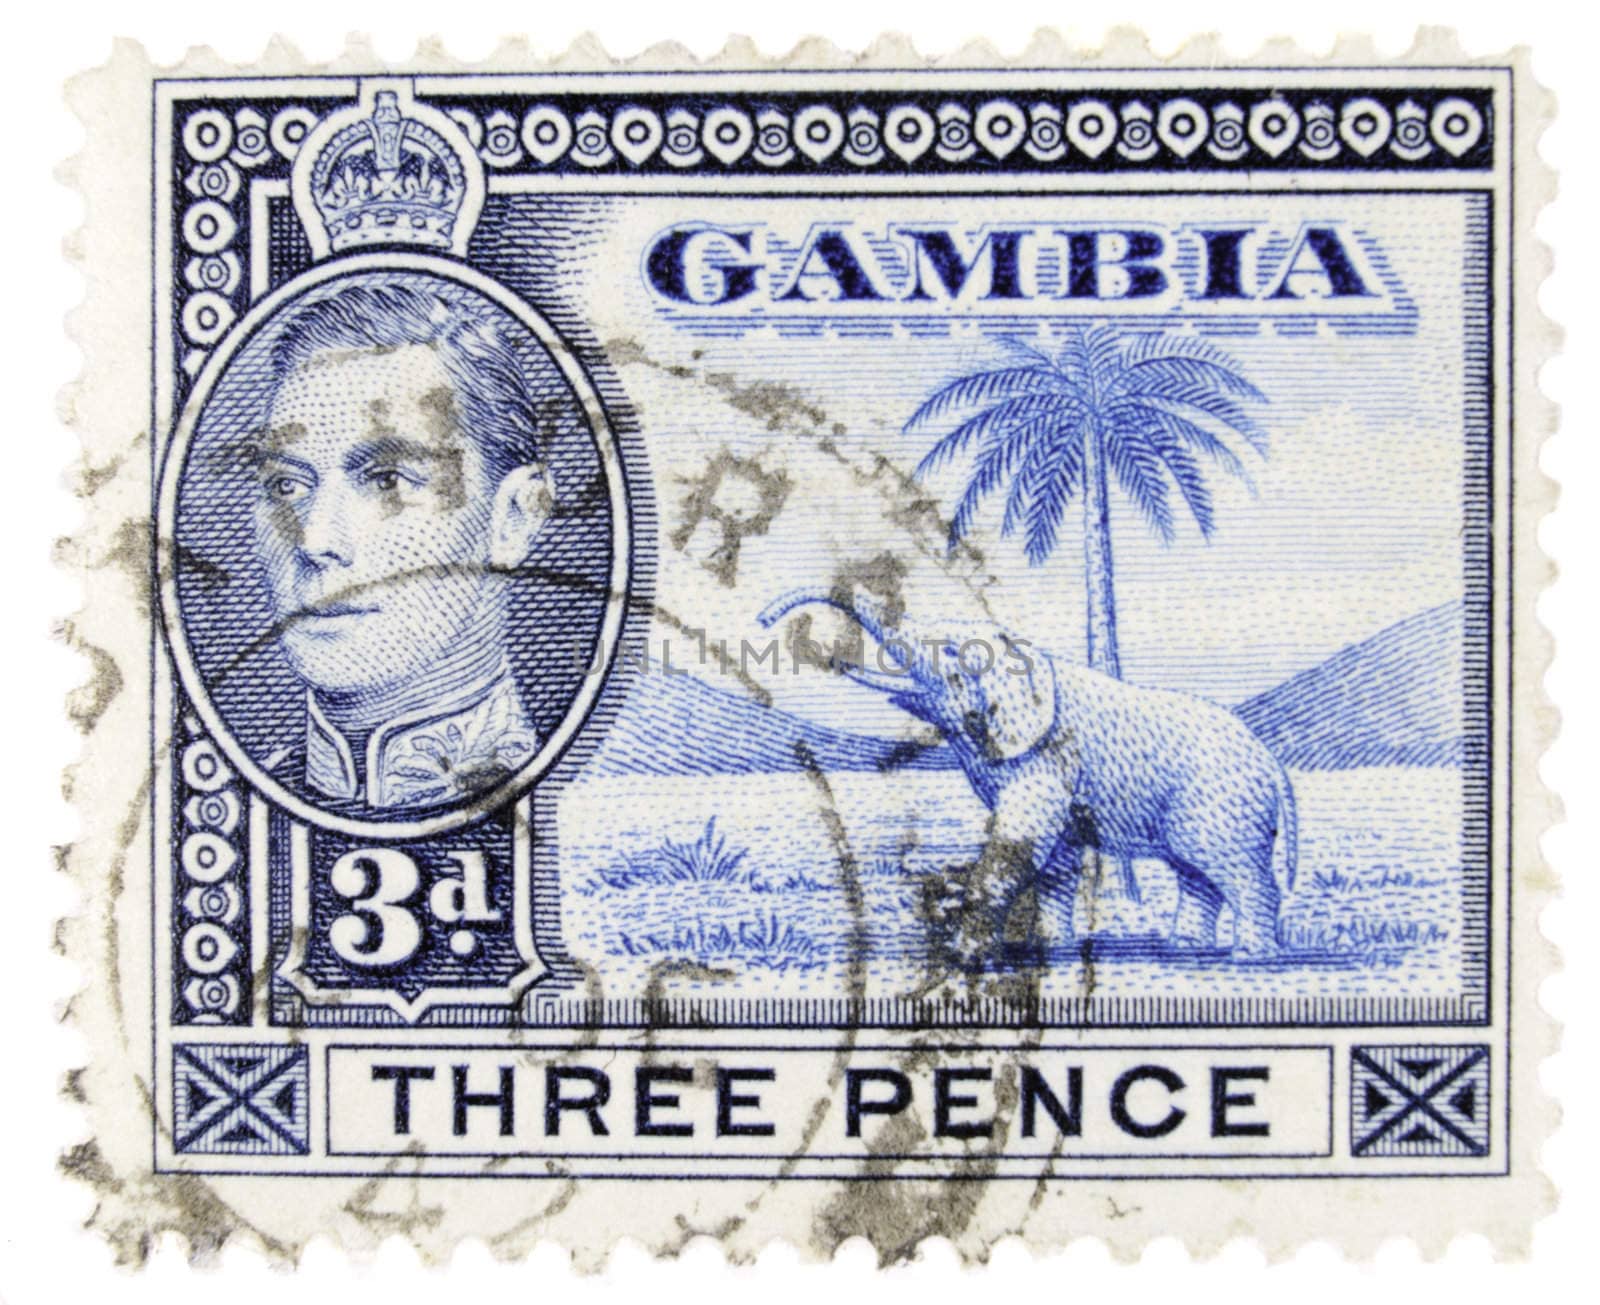 Gambia - Circa 1950 : A vintage Gambian postage stamp image of an elephant beside a palm tree and inset of King George, and a face value of 3 pence, series circa 1950